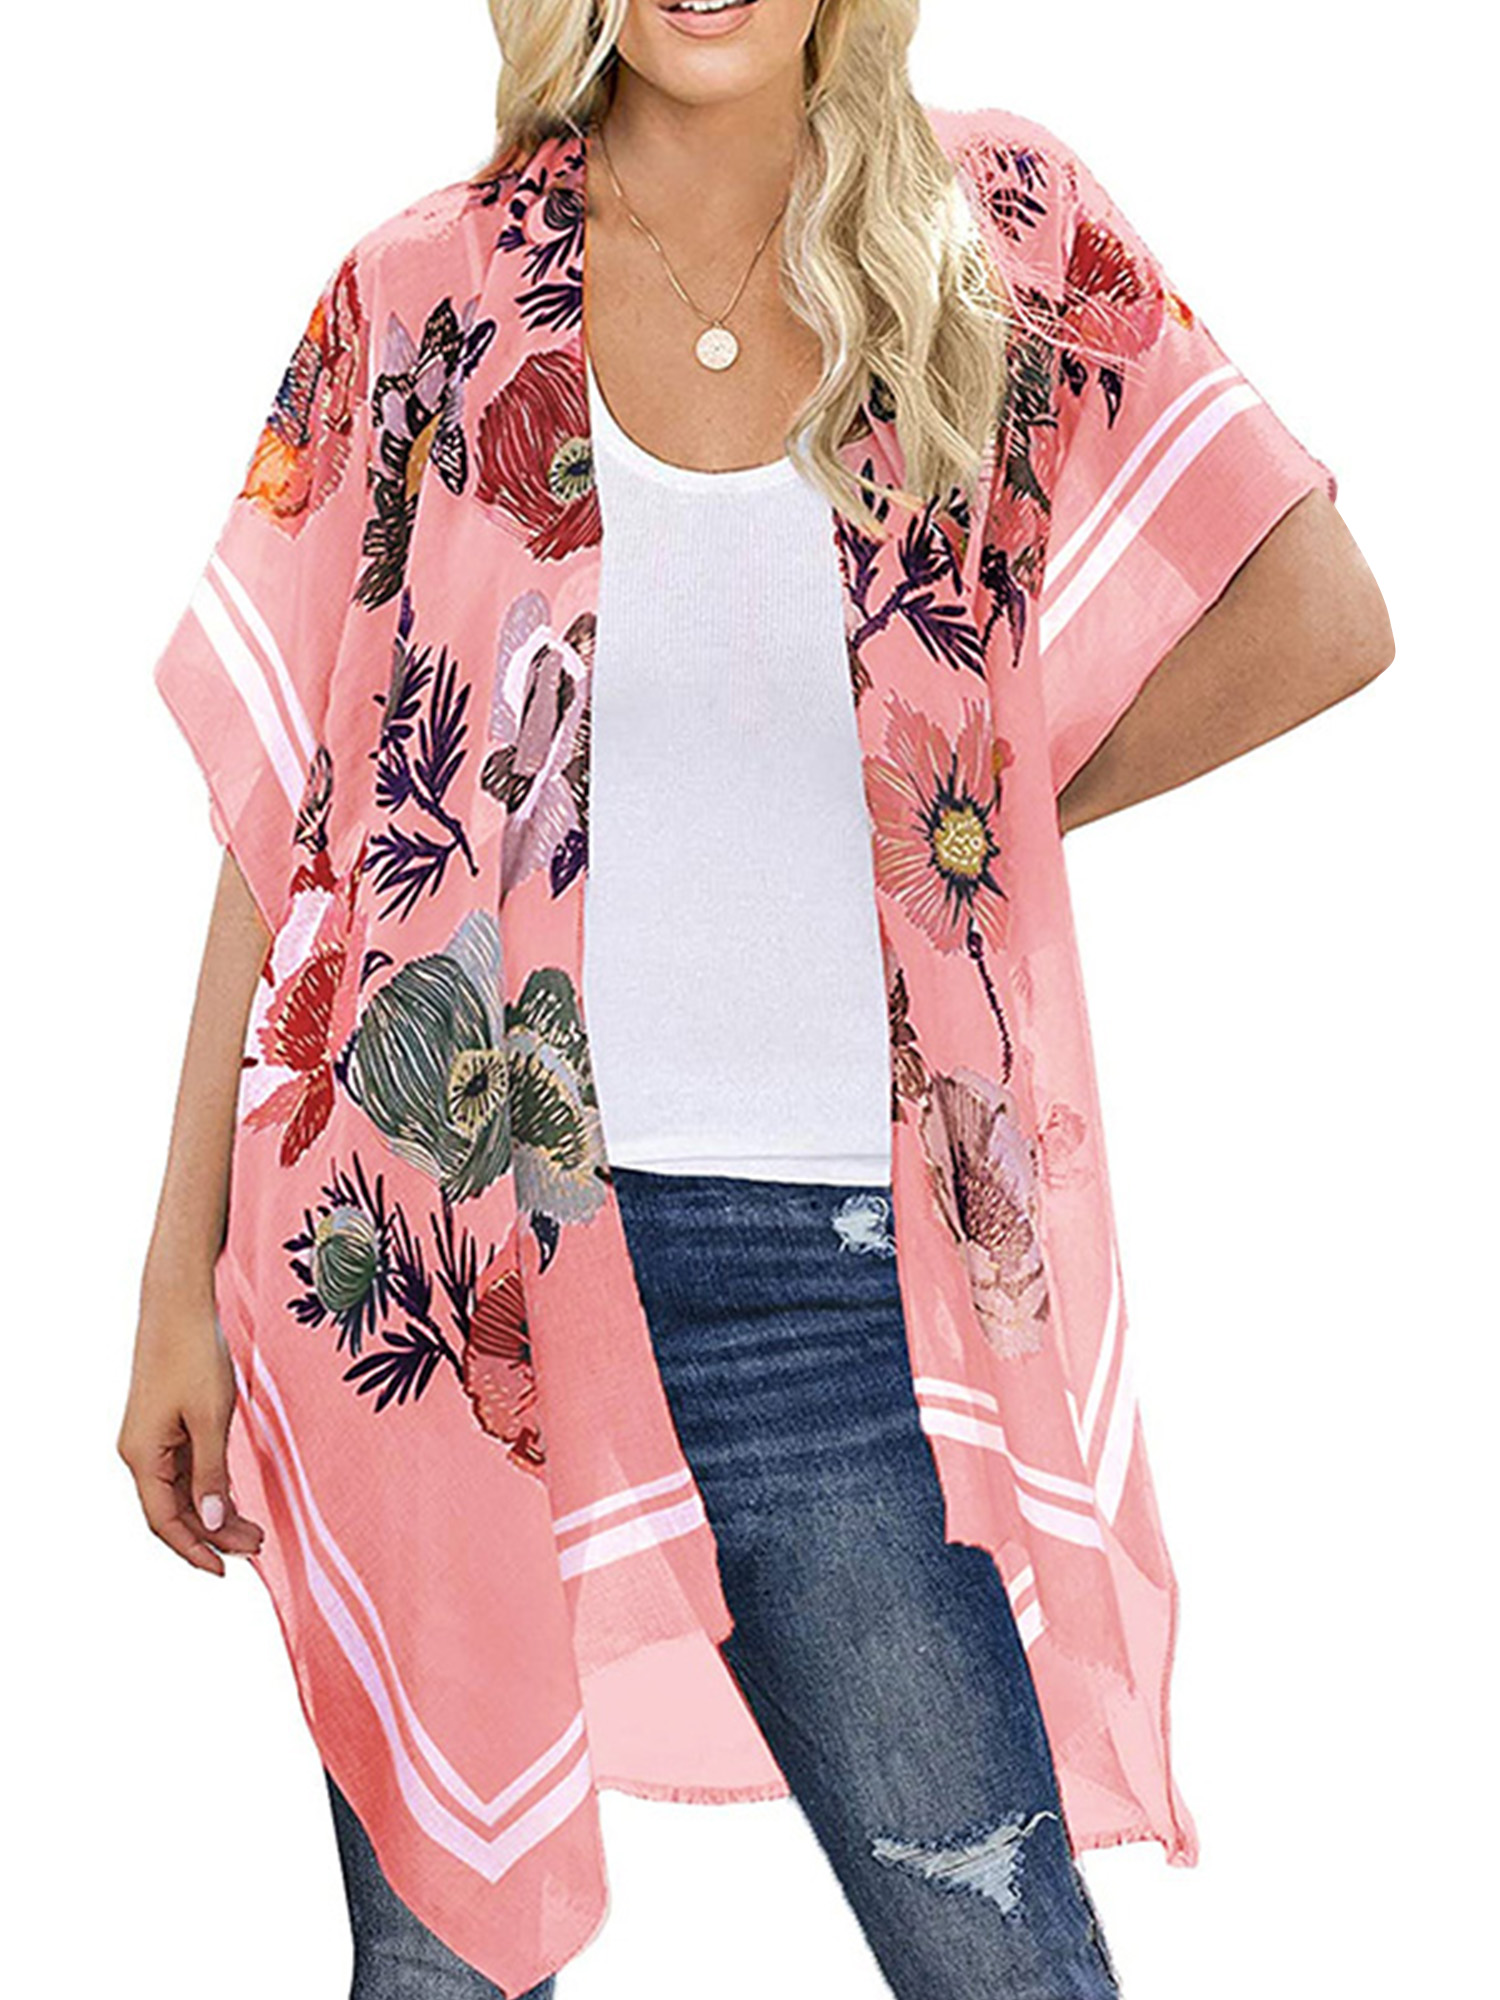 Cover Ups for Swimwear Women Open Front Loose 3//4 Sleeve Shirts Swimsuit Floral Cover Up Long Beach Kimono